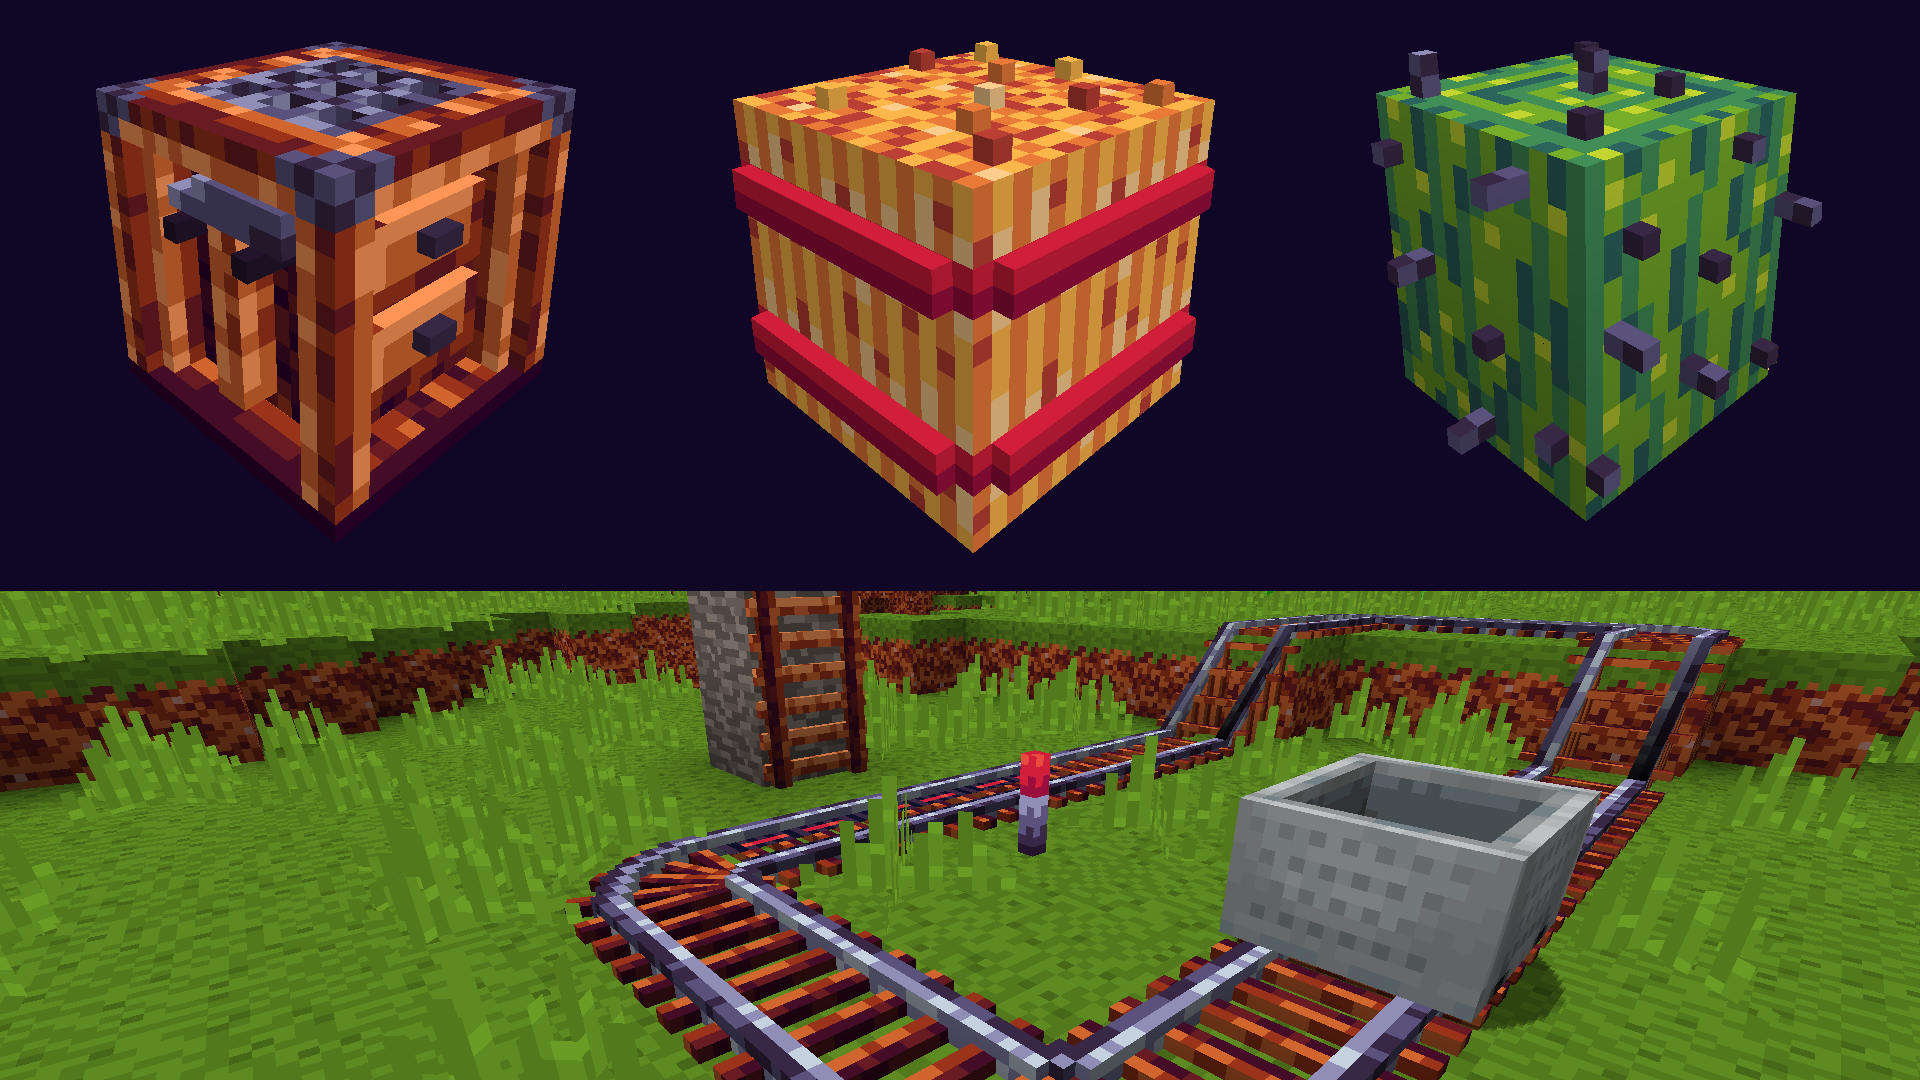 3D Crafting Table, Hay Block, Cactus and Rails